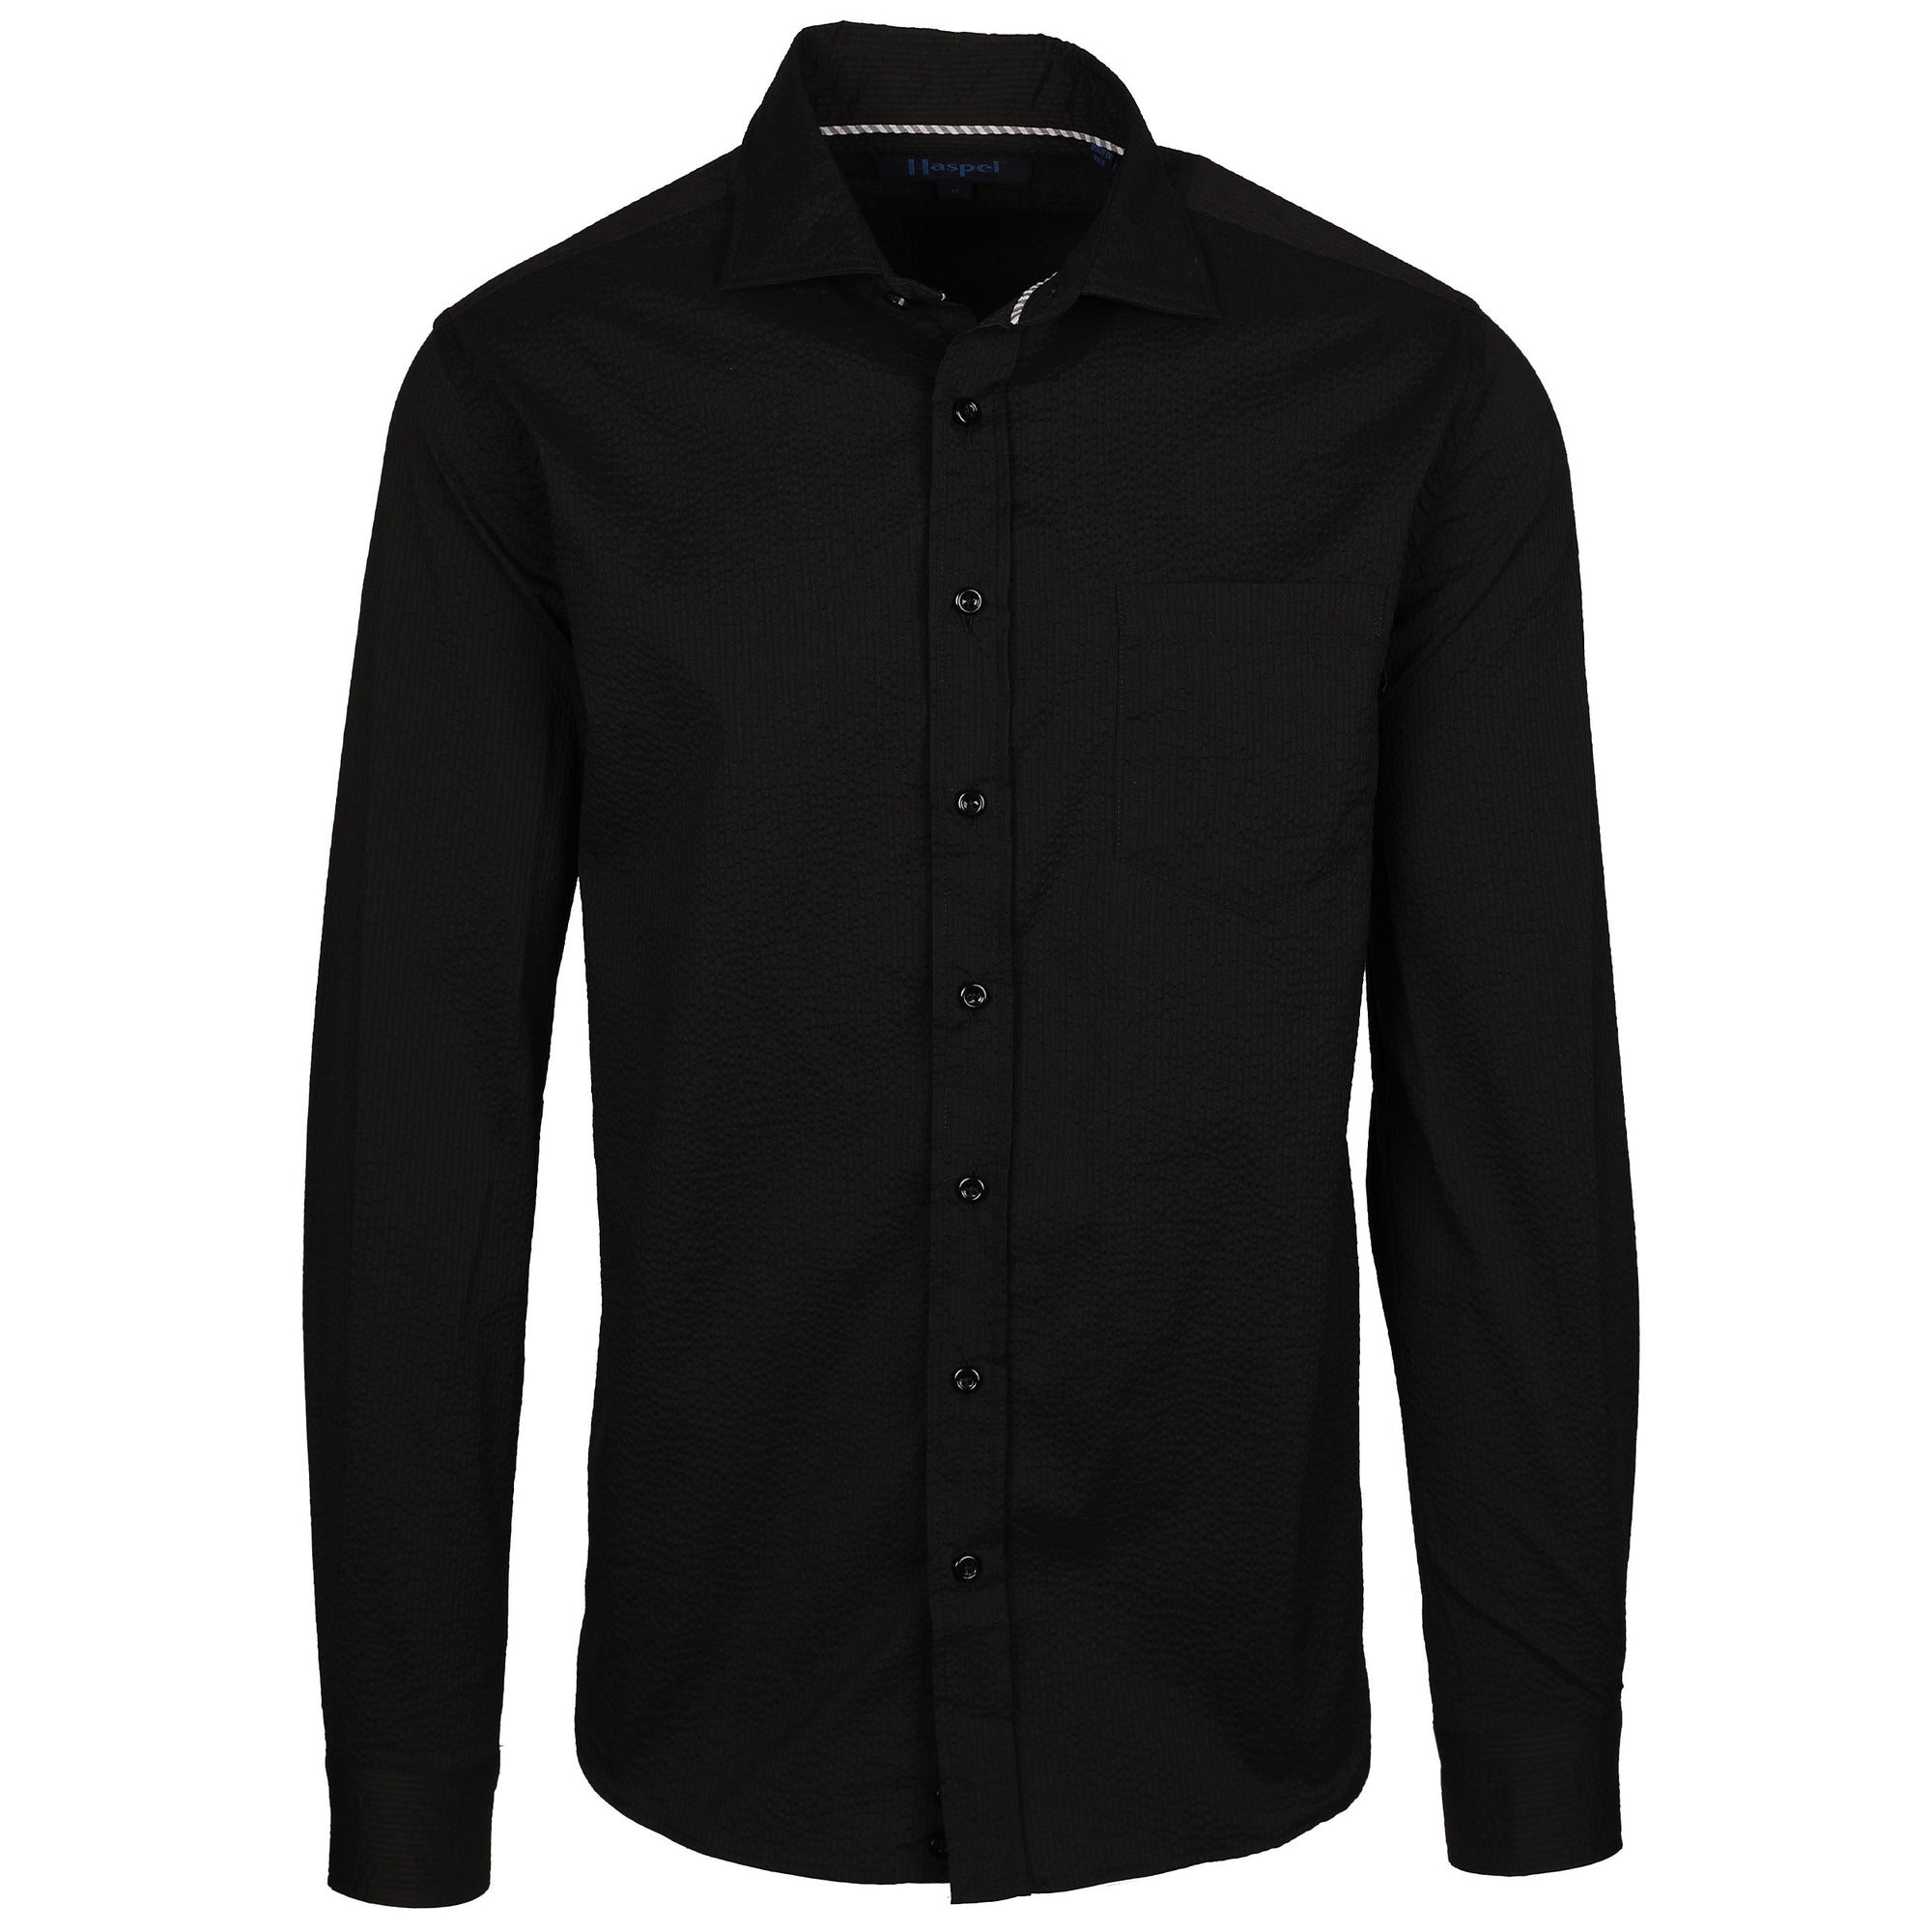 This Chartres Solid Black Seersucker is a classic example of a traditional, iconic fabric. Its seersucker texture is for those who want to make a timeless statement with their outfit and the coolest breezy fabric.   100% Cotton • Spread Collar with Removable Collar Stays • Long Sleeve • Chest Pocket • Machine Washable • Made in Italy • Return Policy